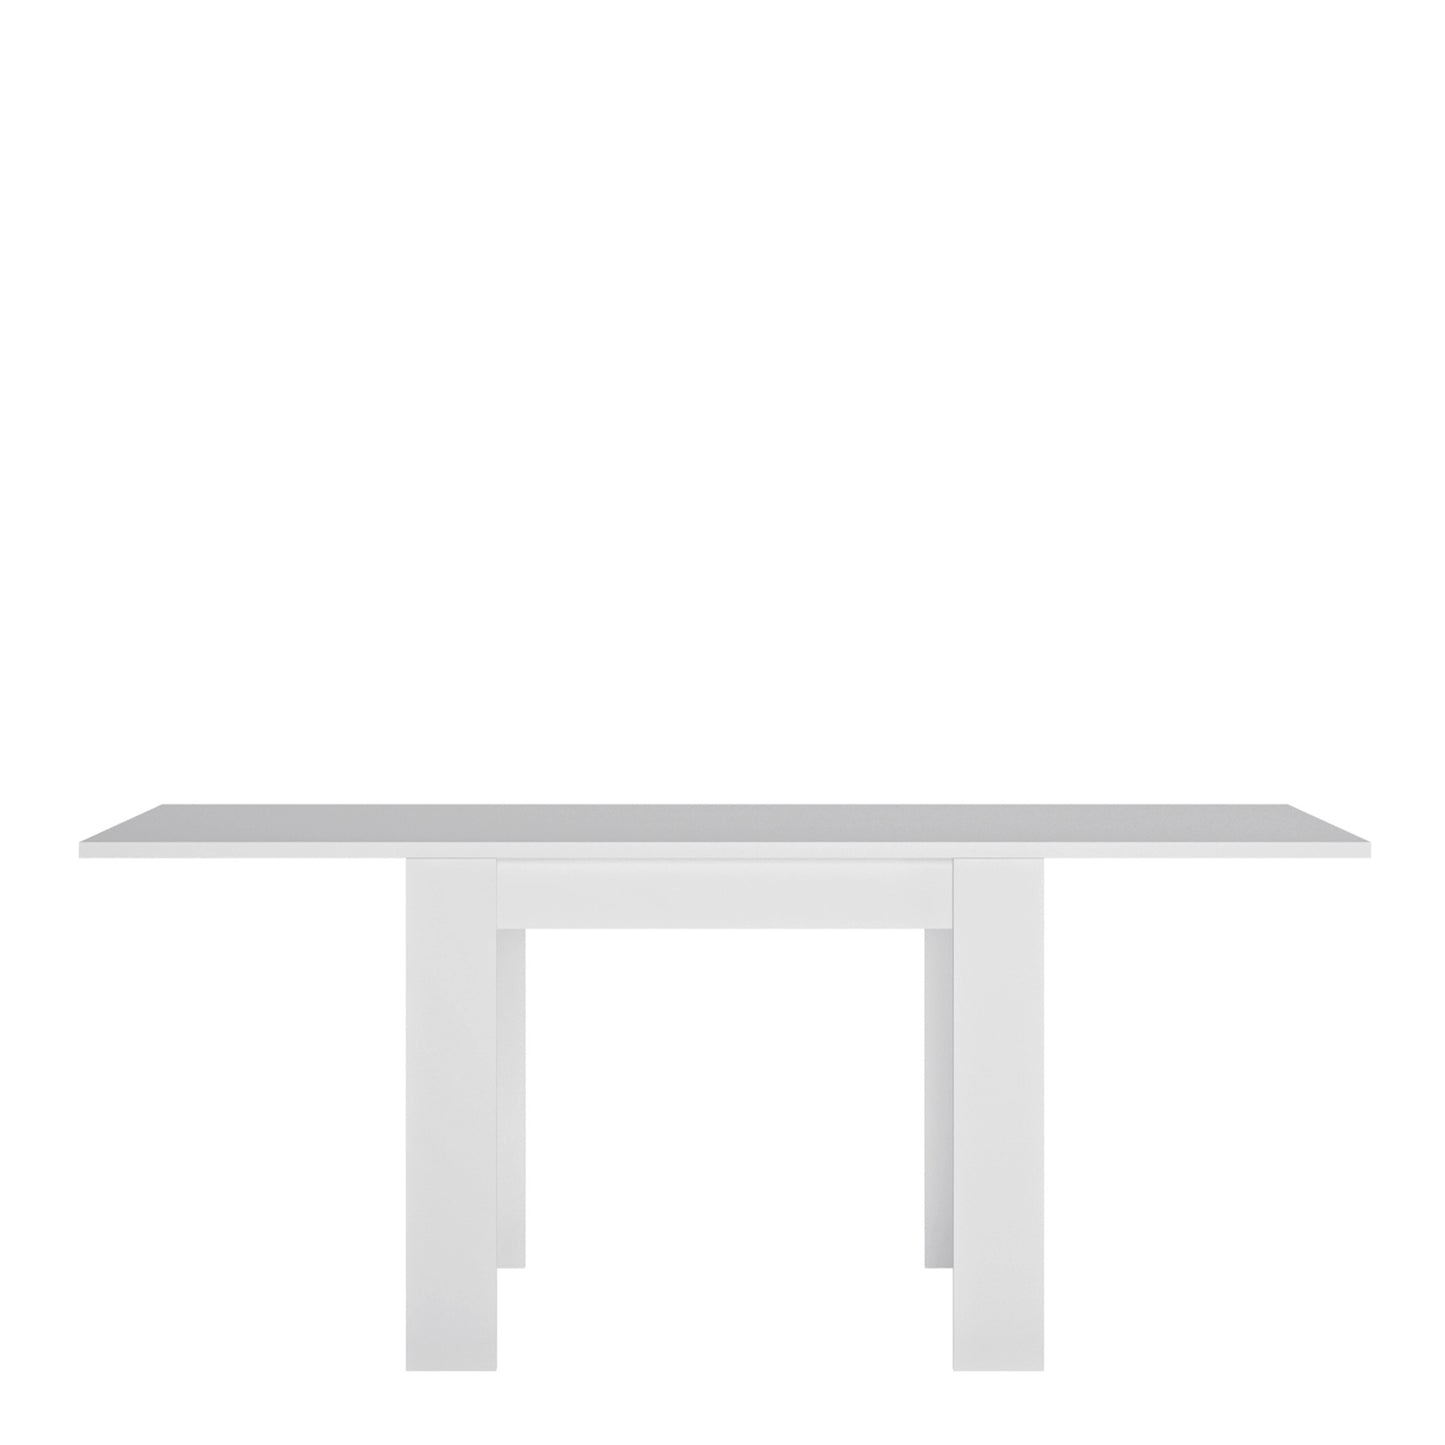 Furniture To Go Lyon Small Extending Dining Table 90/180cm in White & High Gloss